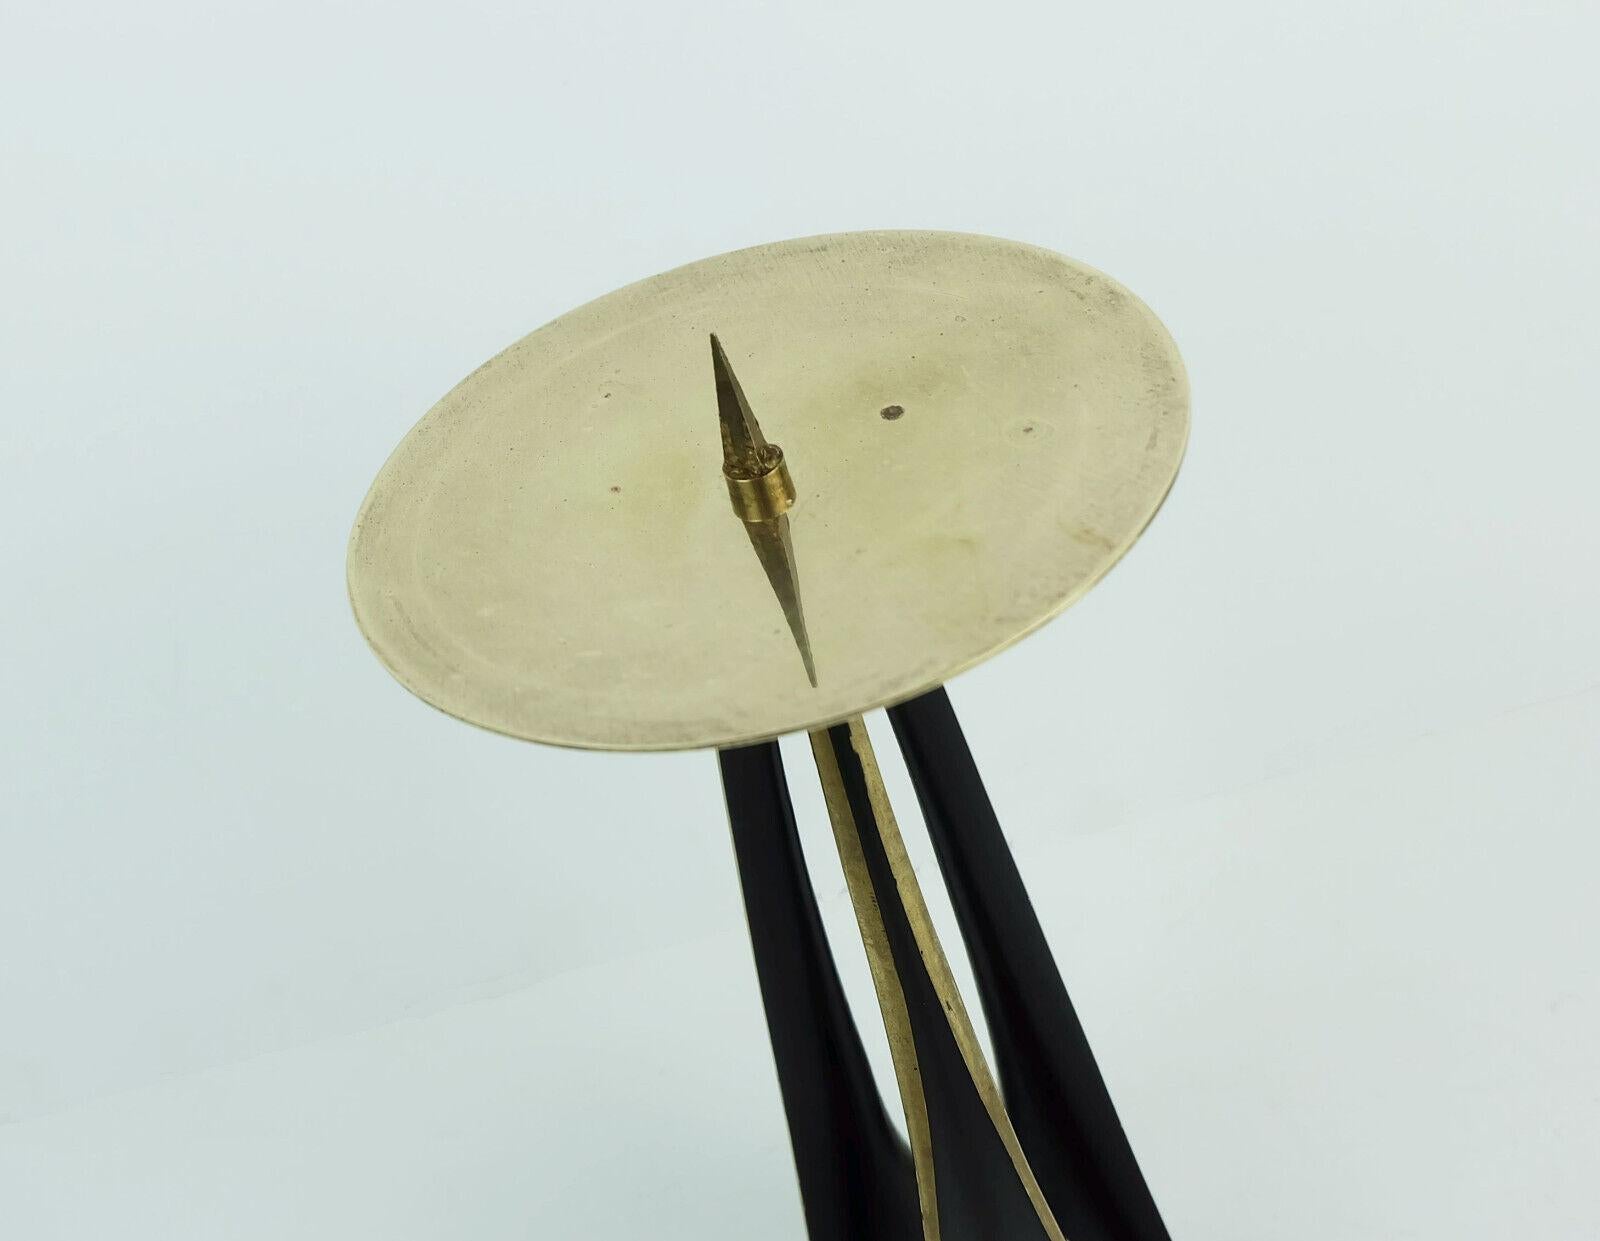 Mid century modern candle holder designed by German goldsmith and industrial designer Klaus Ullrich in the 1950s and manufactured by Faber & Schumacher Duisburg. 
Made of brass, partially lacquered in matte black. Streamline design, a perfect